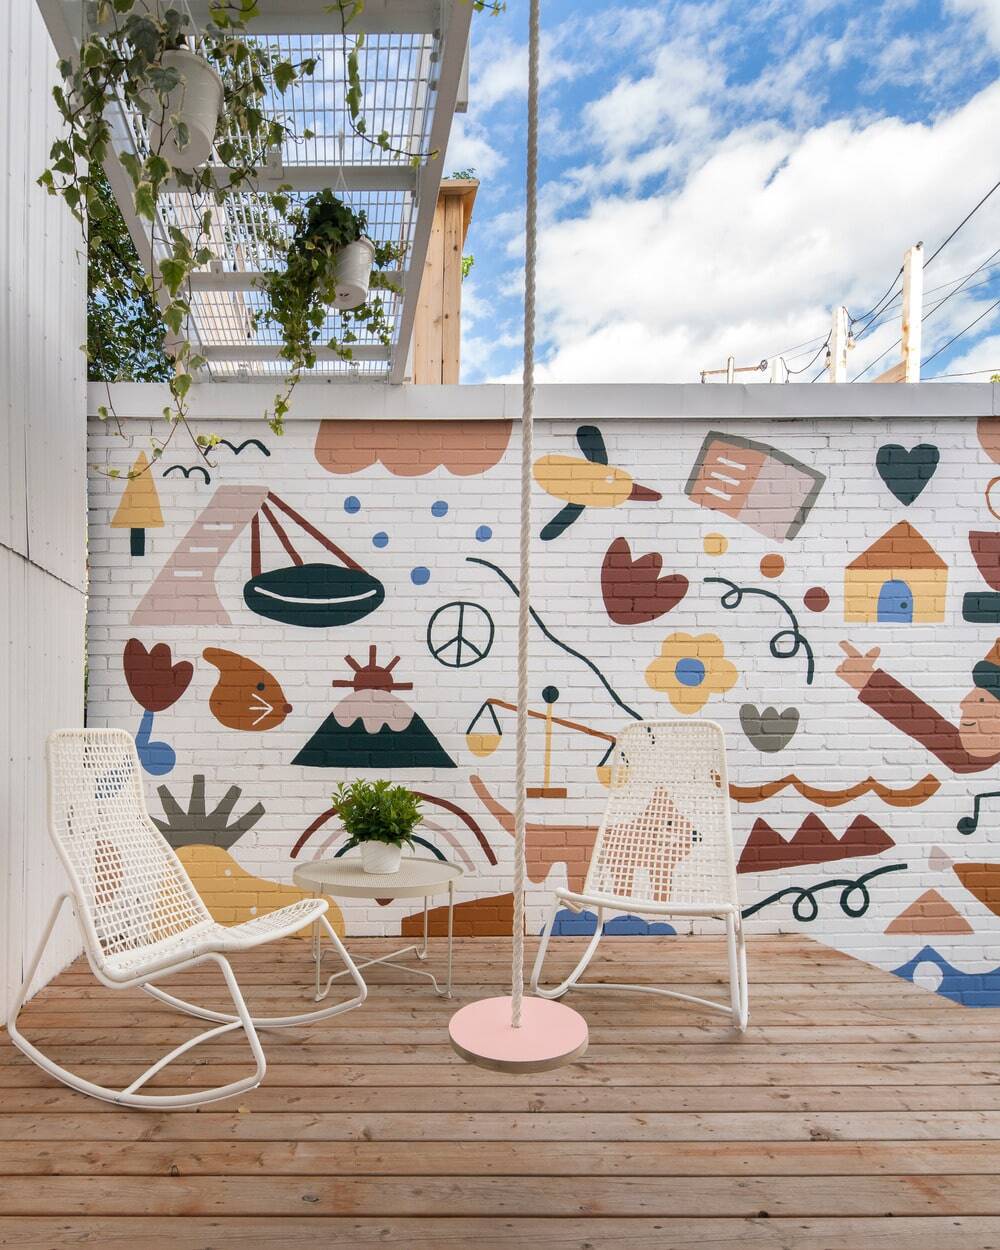 Inner courtyard with mural by Artist Marc-Olivier Lamothe